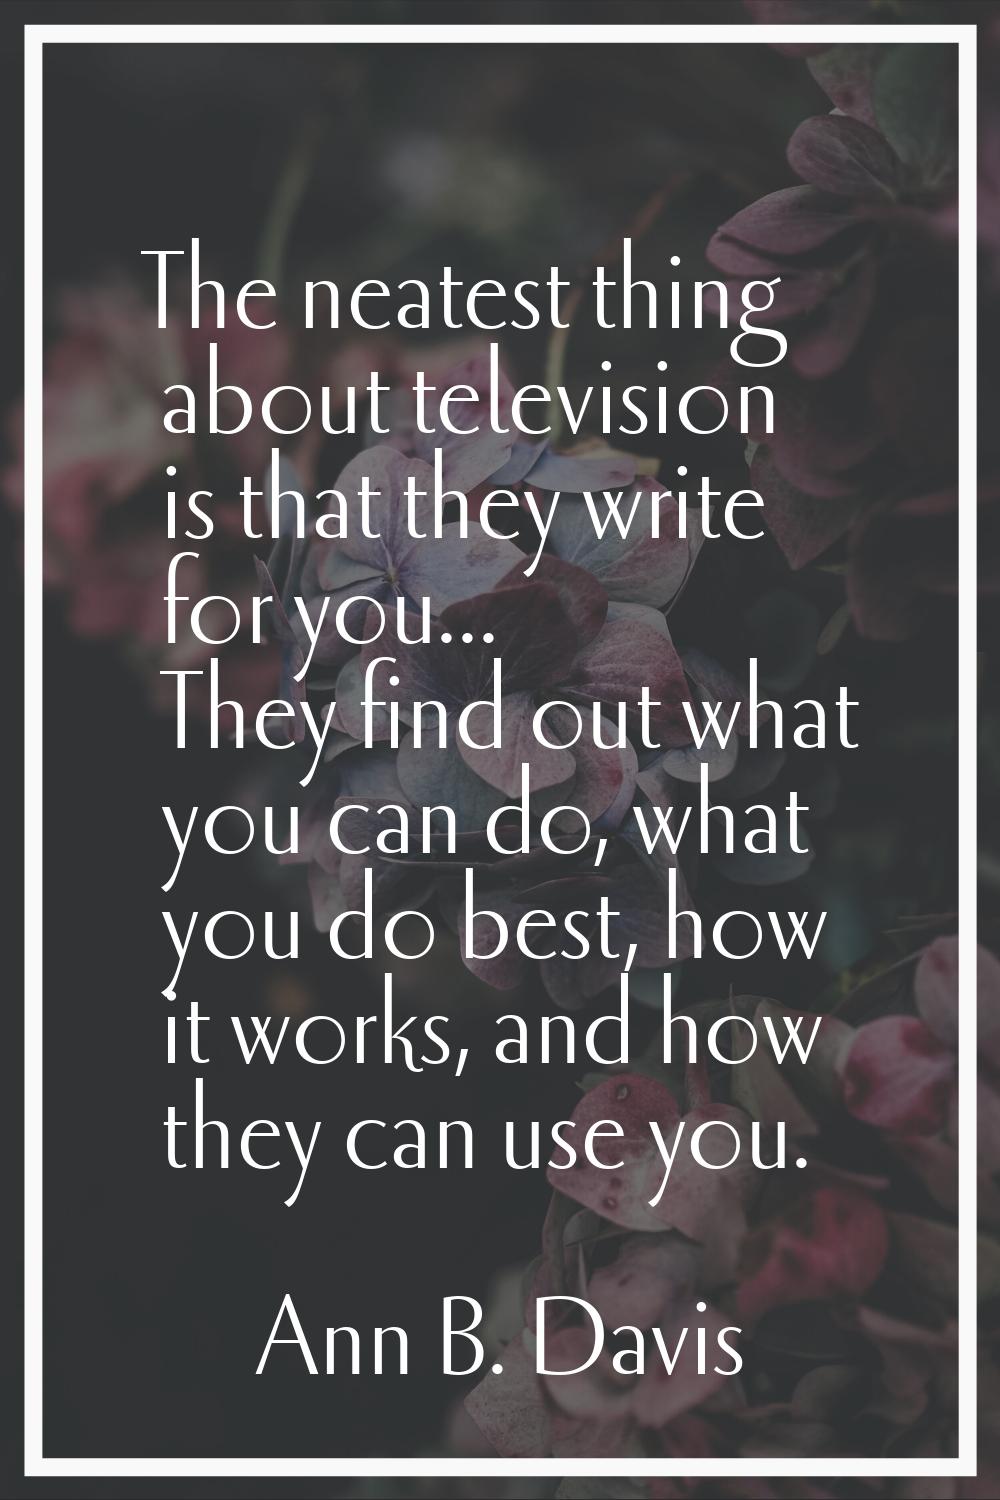 The neatest thing about television is that they write for you... They find out what you can do, wha